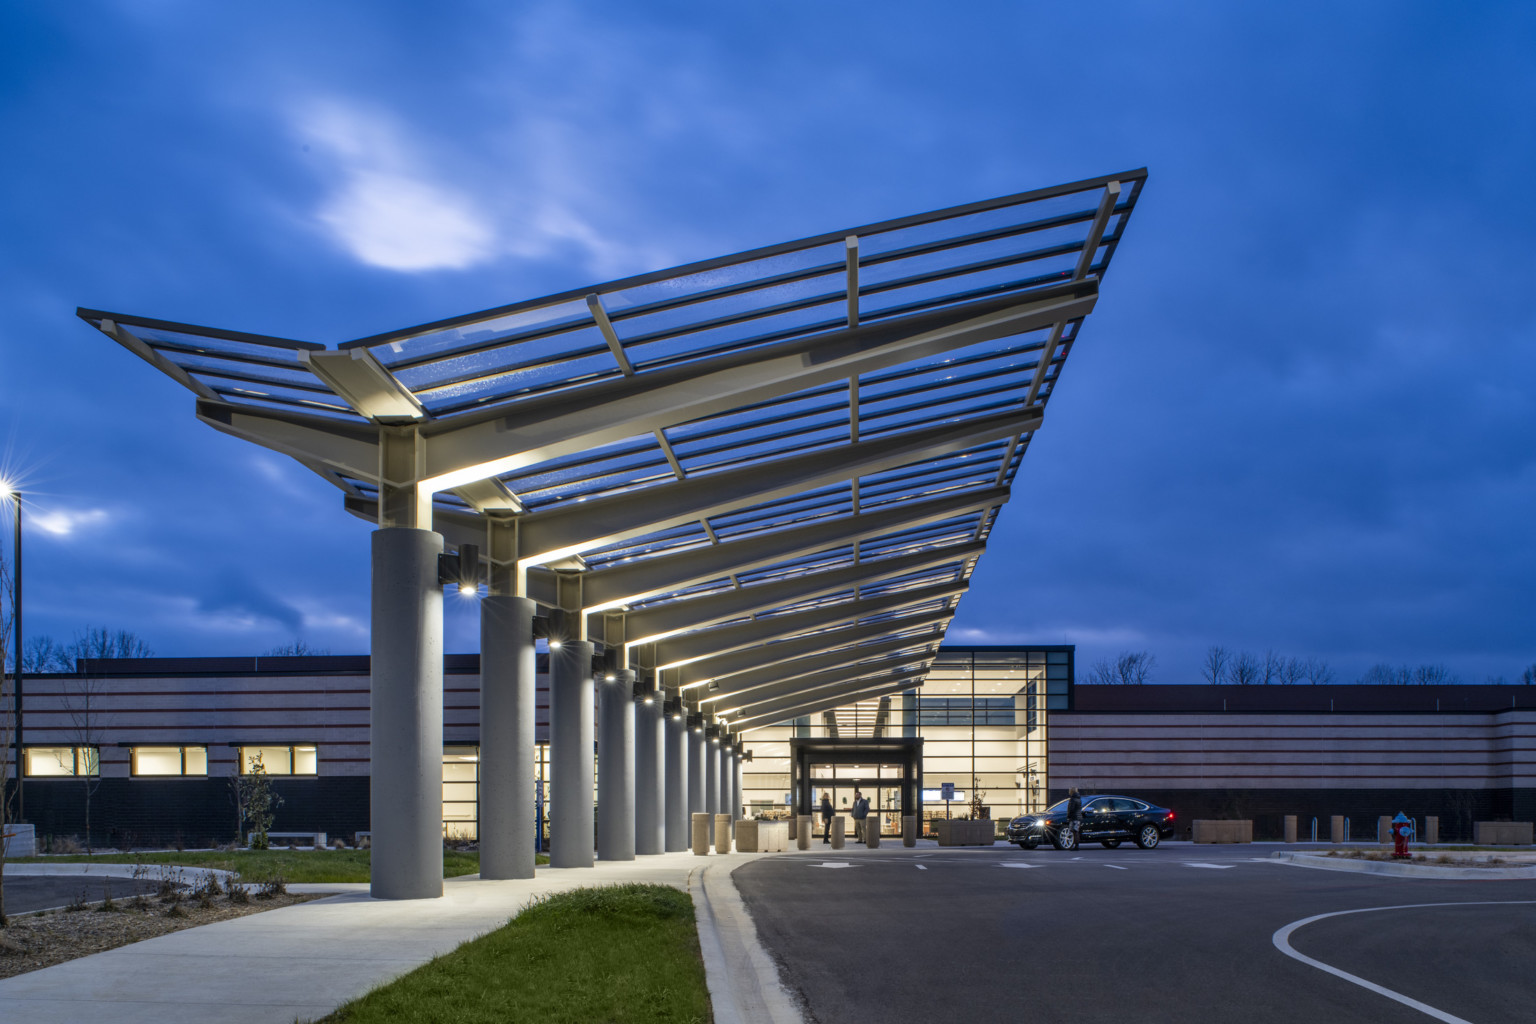 Entry viewed from driveway below angled transparent canopy with metal grid supported by grey pillars with large trusses